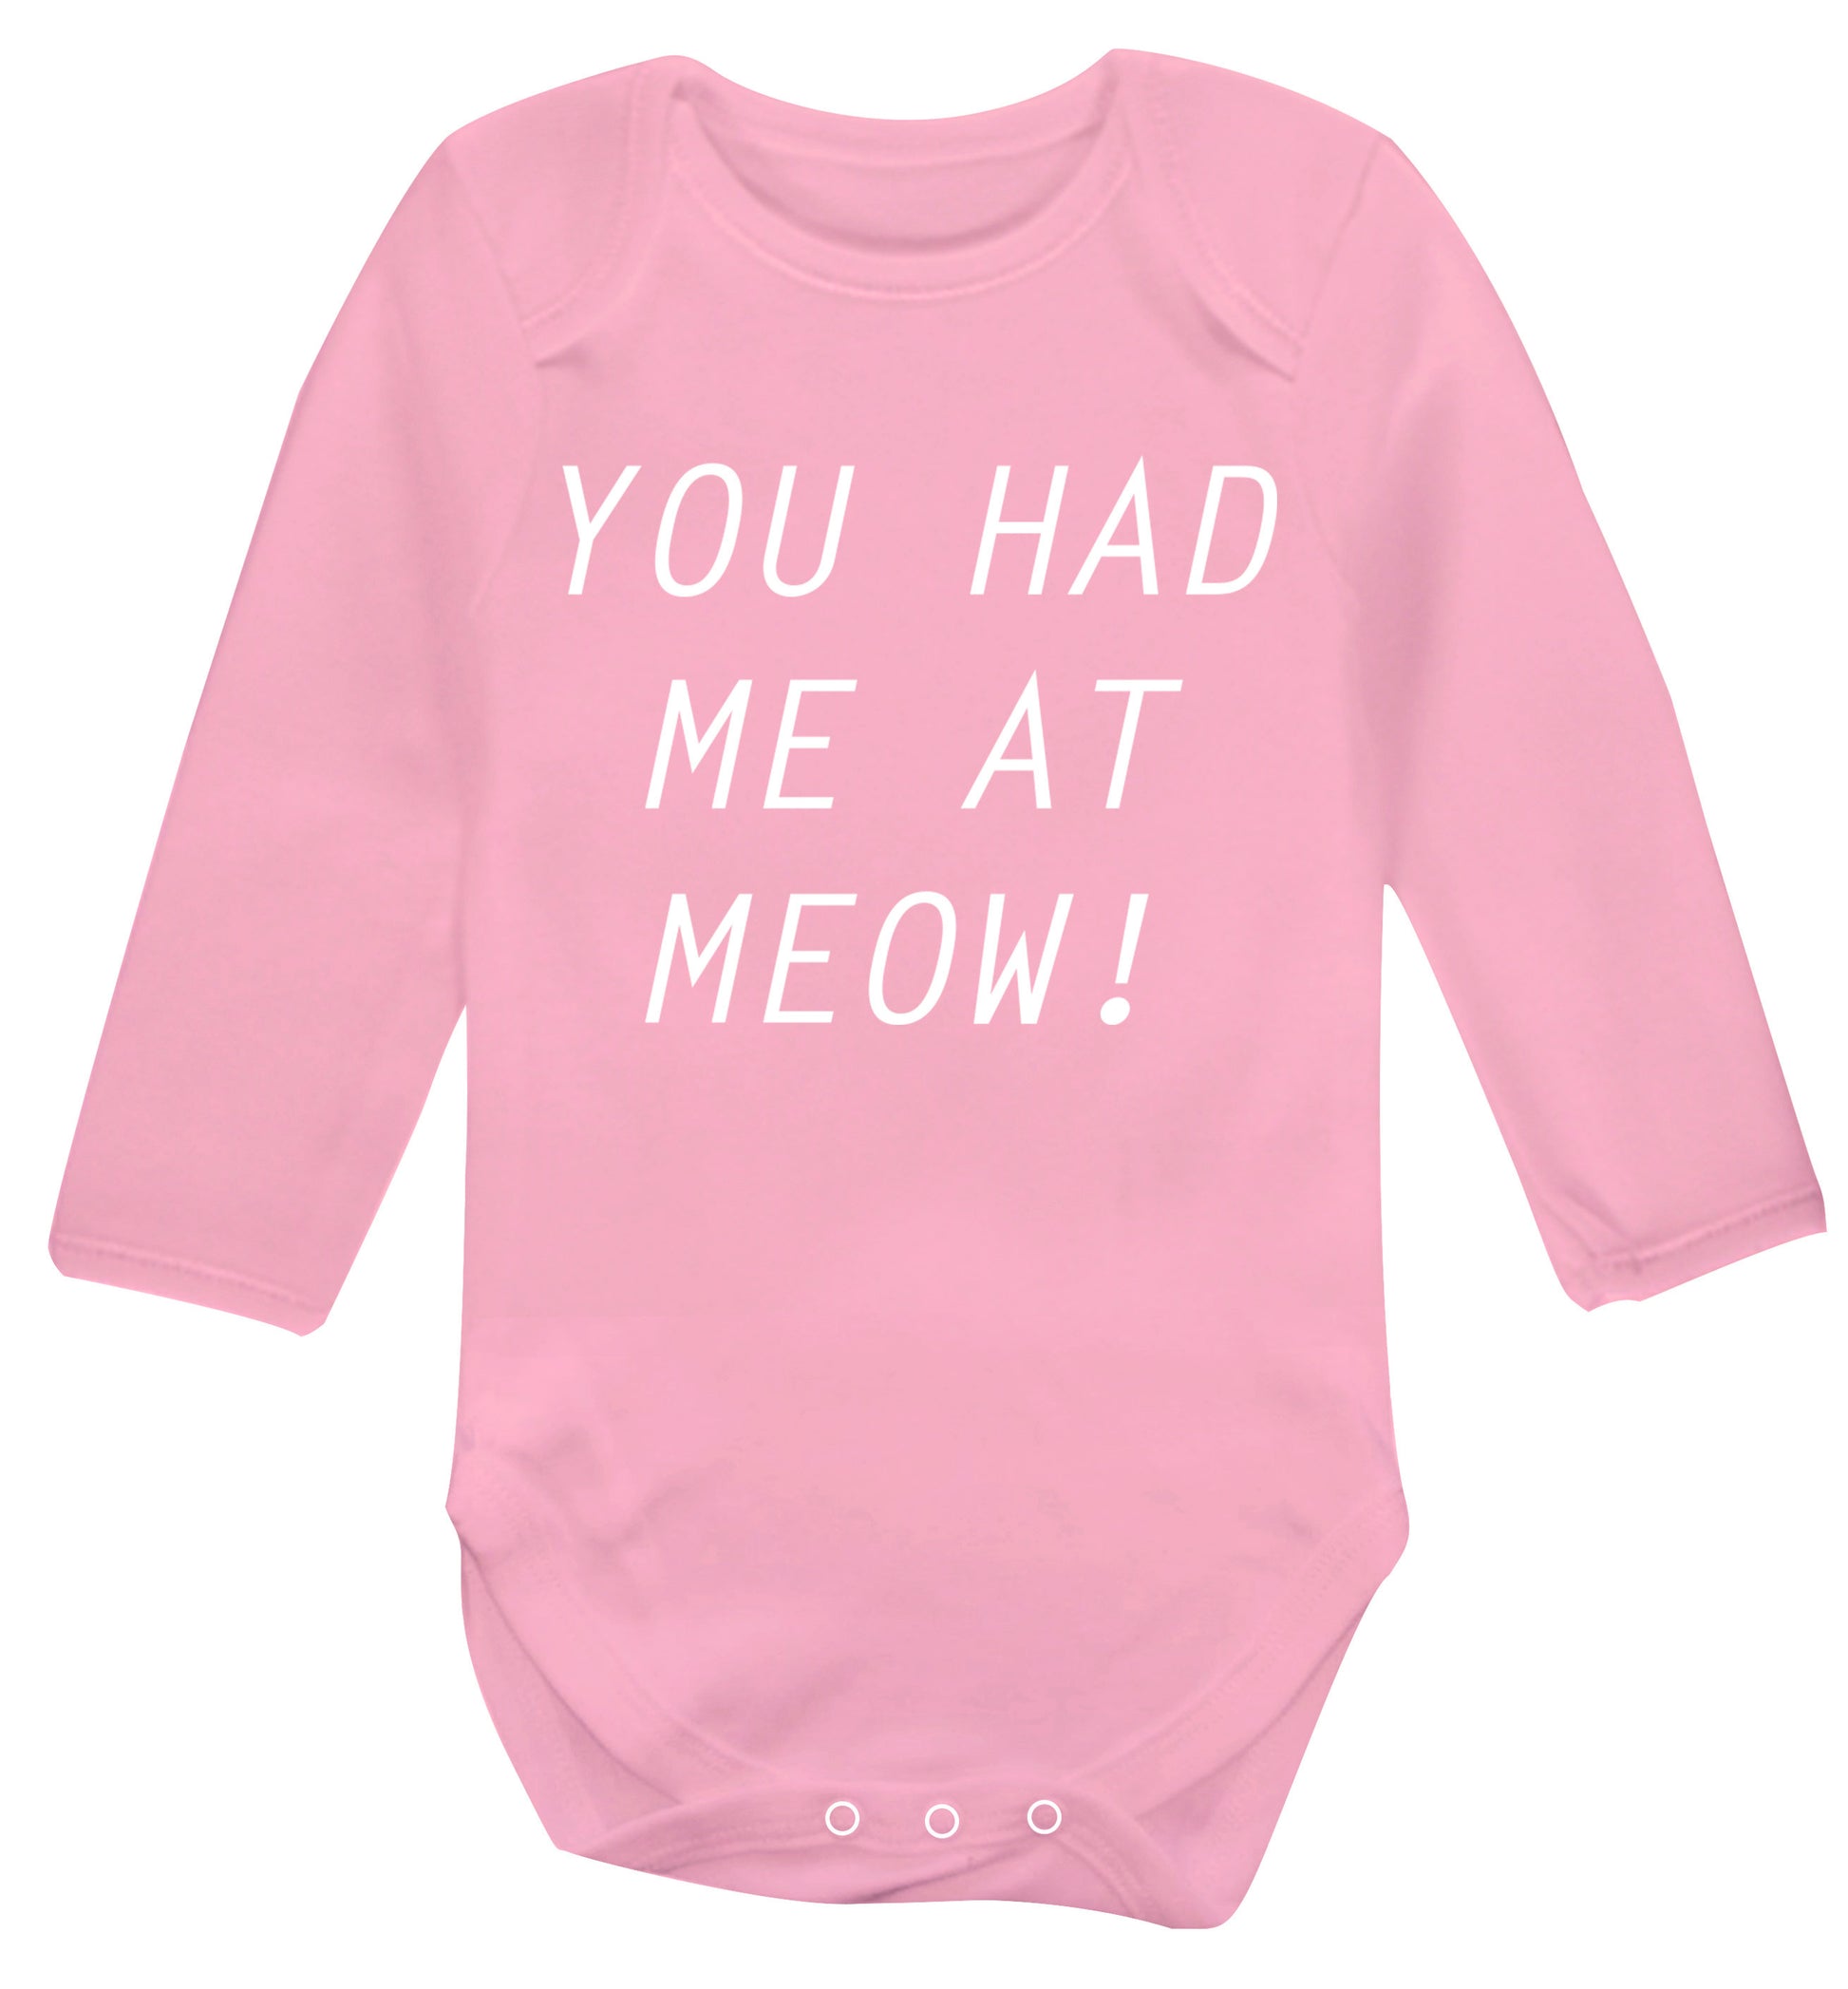 You had me at meow Baby Vest long sleeved pale pink 6-12 months